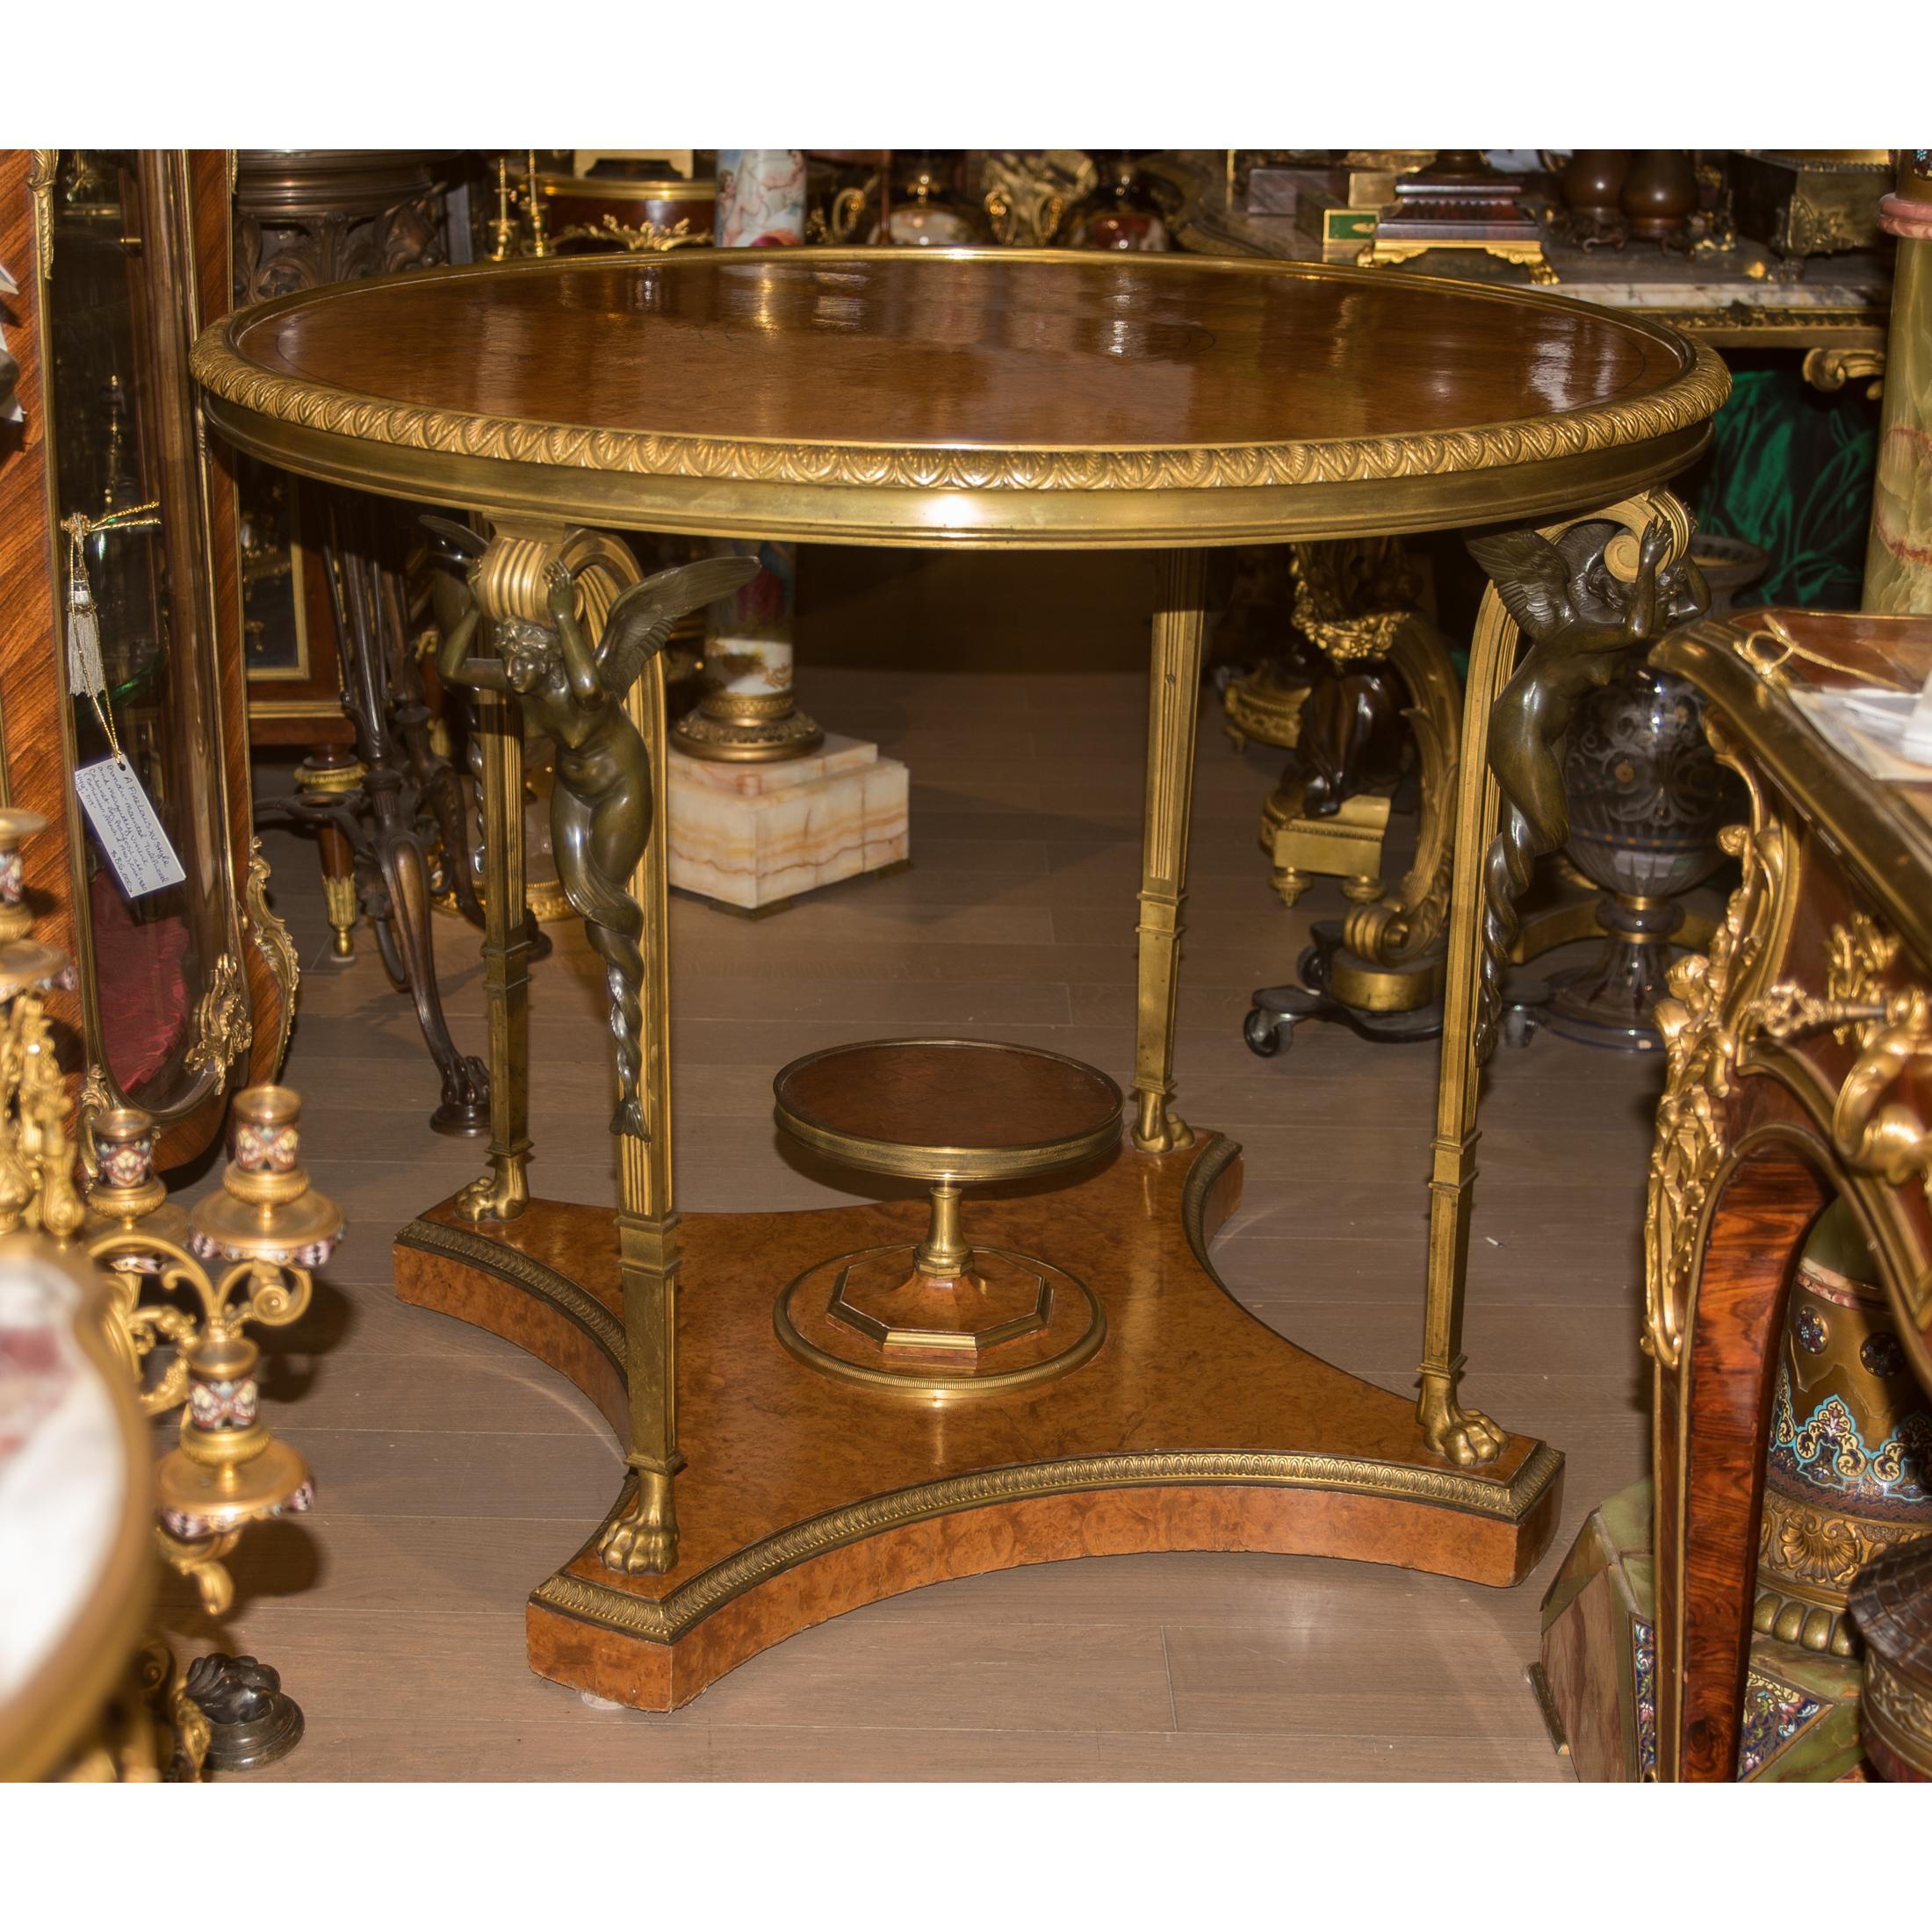 Exquisite High Quality Gilt and Patinated Bronze-Mounted Louis XVI Style Amboyna Center Table after The Fontainbleau model. Signed F. Linke

Maker: François Linke (1855-1946)
Date: Circa early 20th century
Origin: French
Dimension: 31 in. x 38